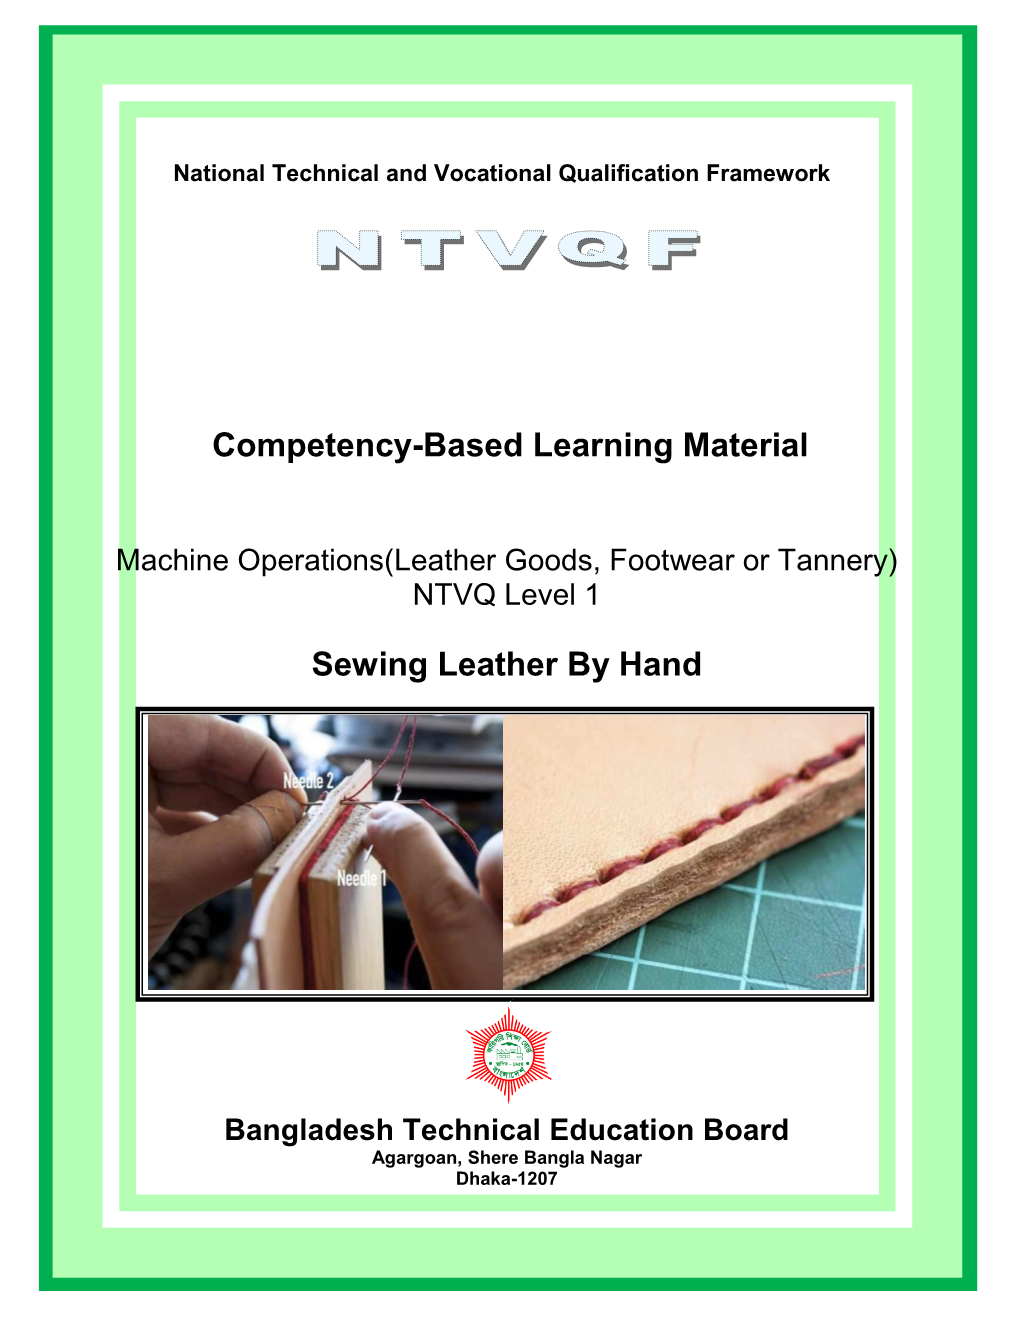 Competency-Based Learning Material Sewing Leather by Hand